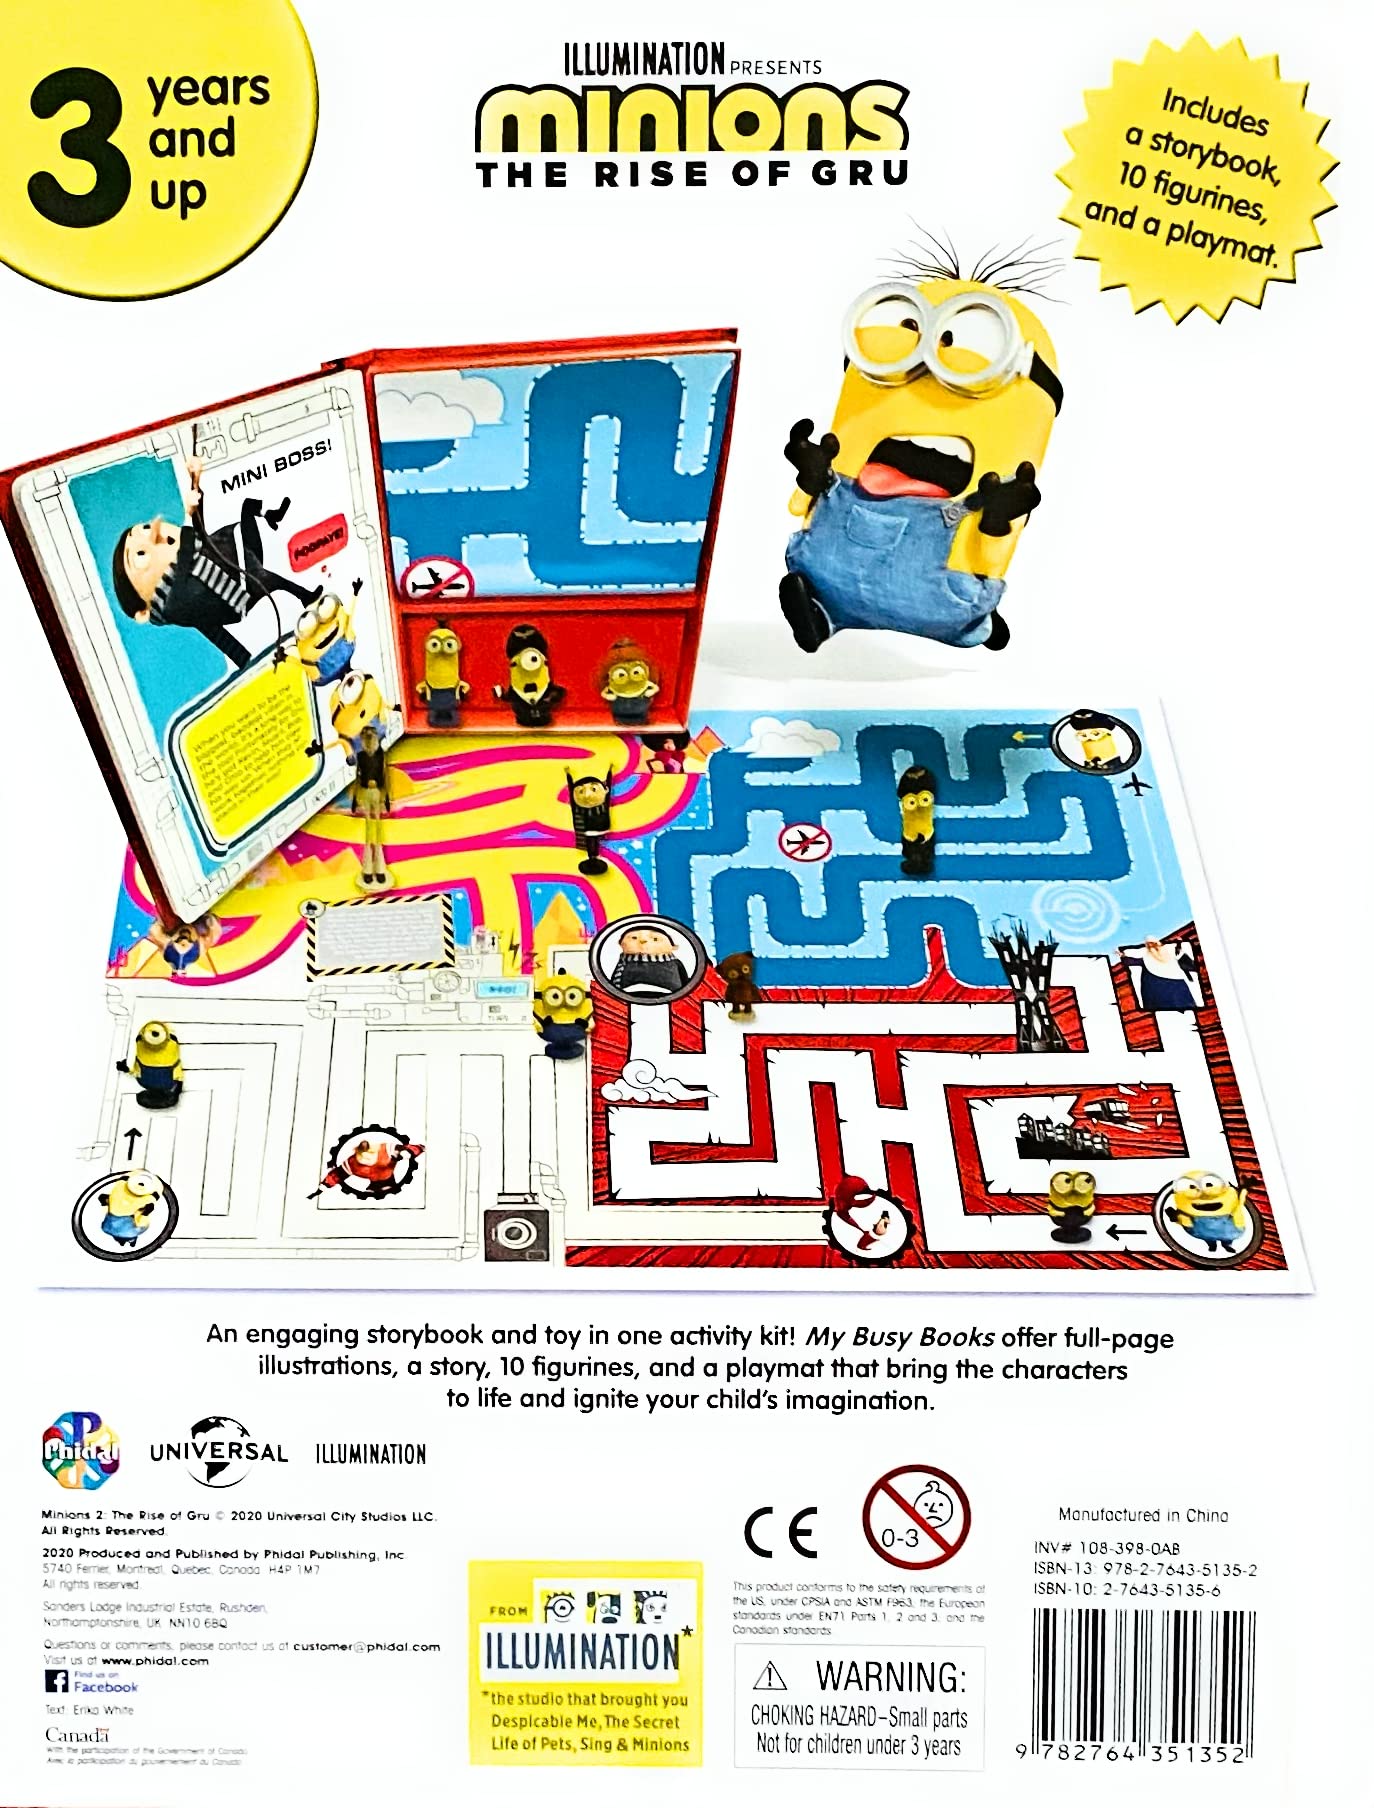 My Busy Book Minions Rise of Gru Story Playmat 10 Figures